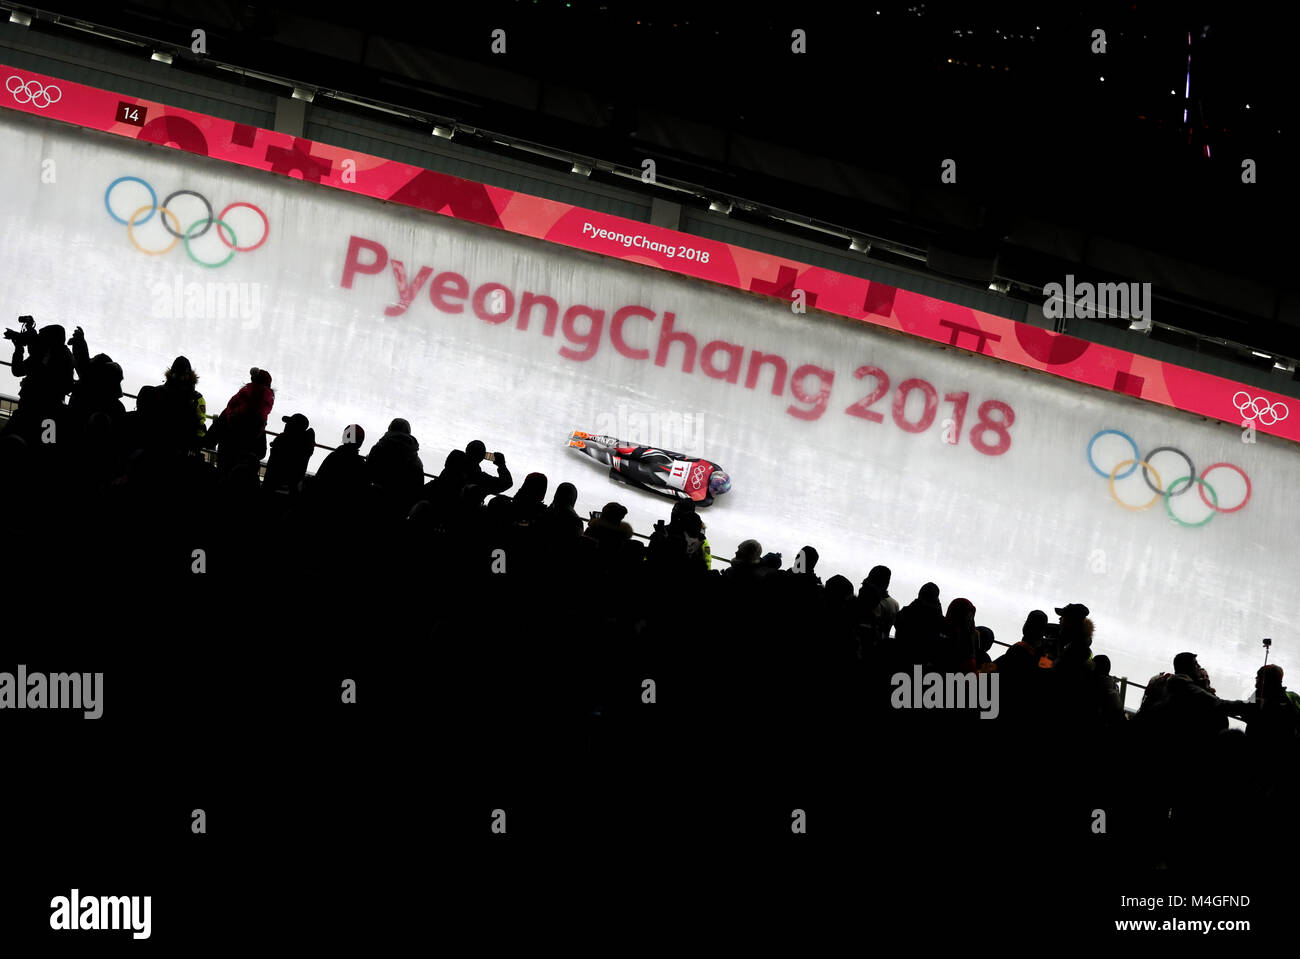 Canada's Mirela Rahneva competes in the Women's Skeleton at the Olympic Sliding Centre during day seven of the PyeongChang 2018 Winter Olympic Games in South Korea. Stock Photo